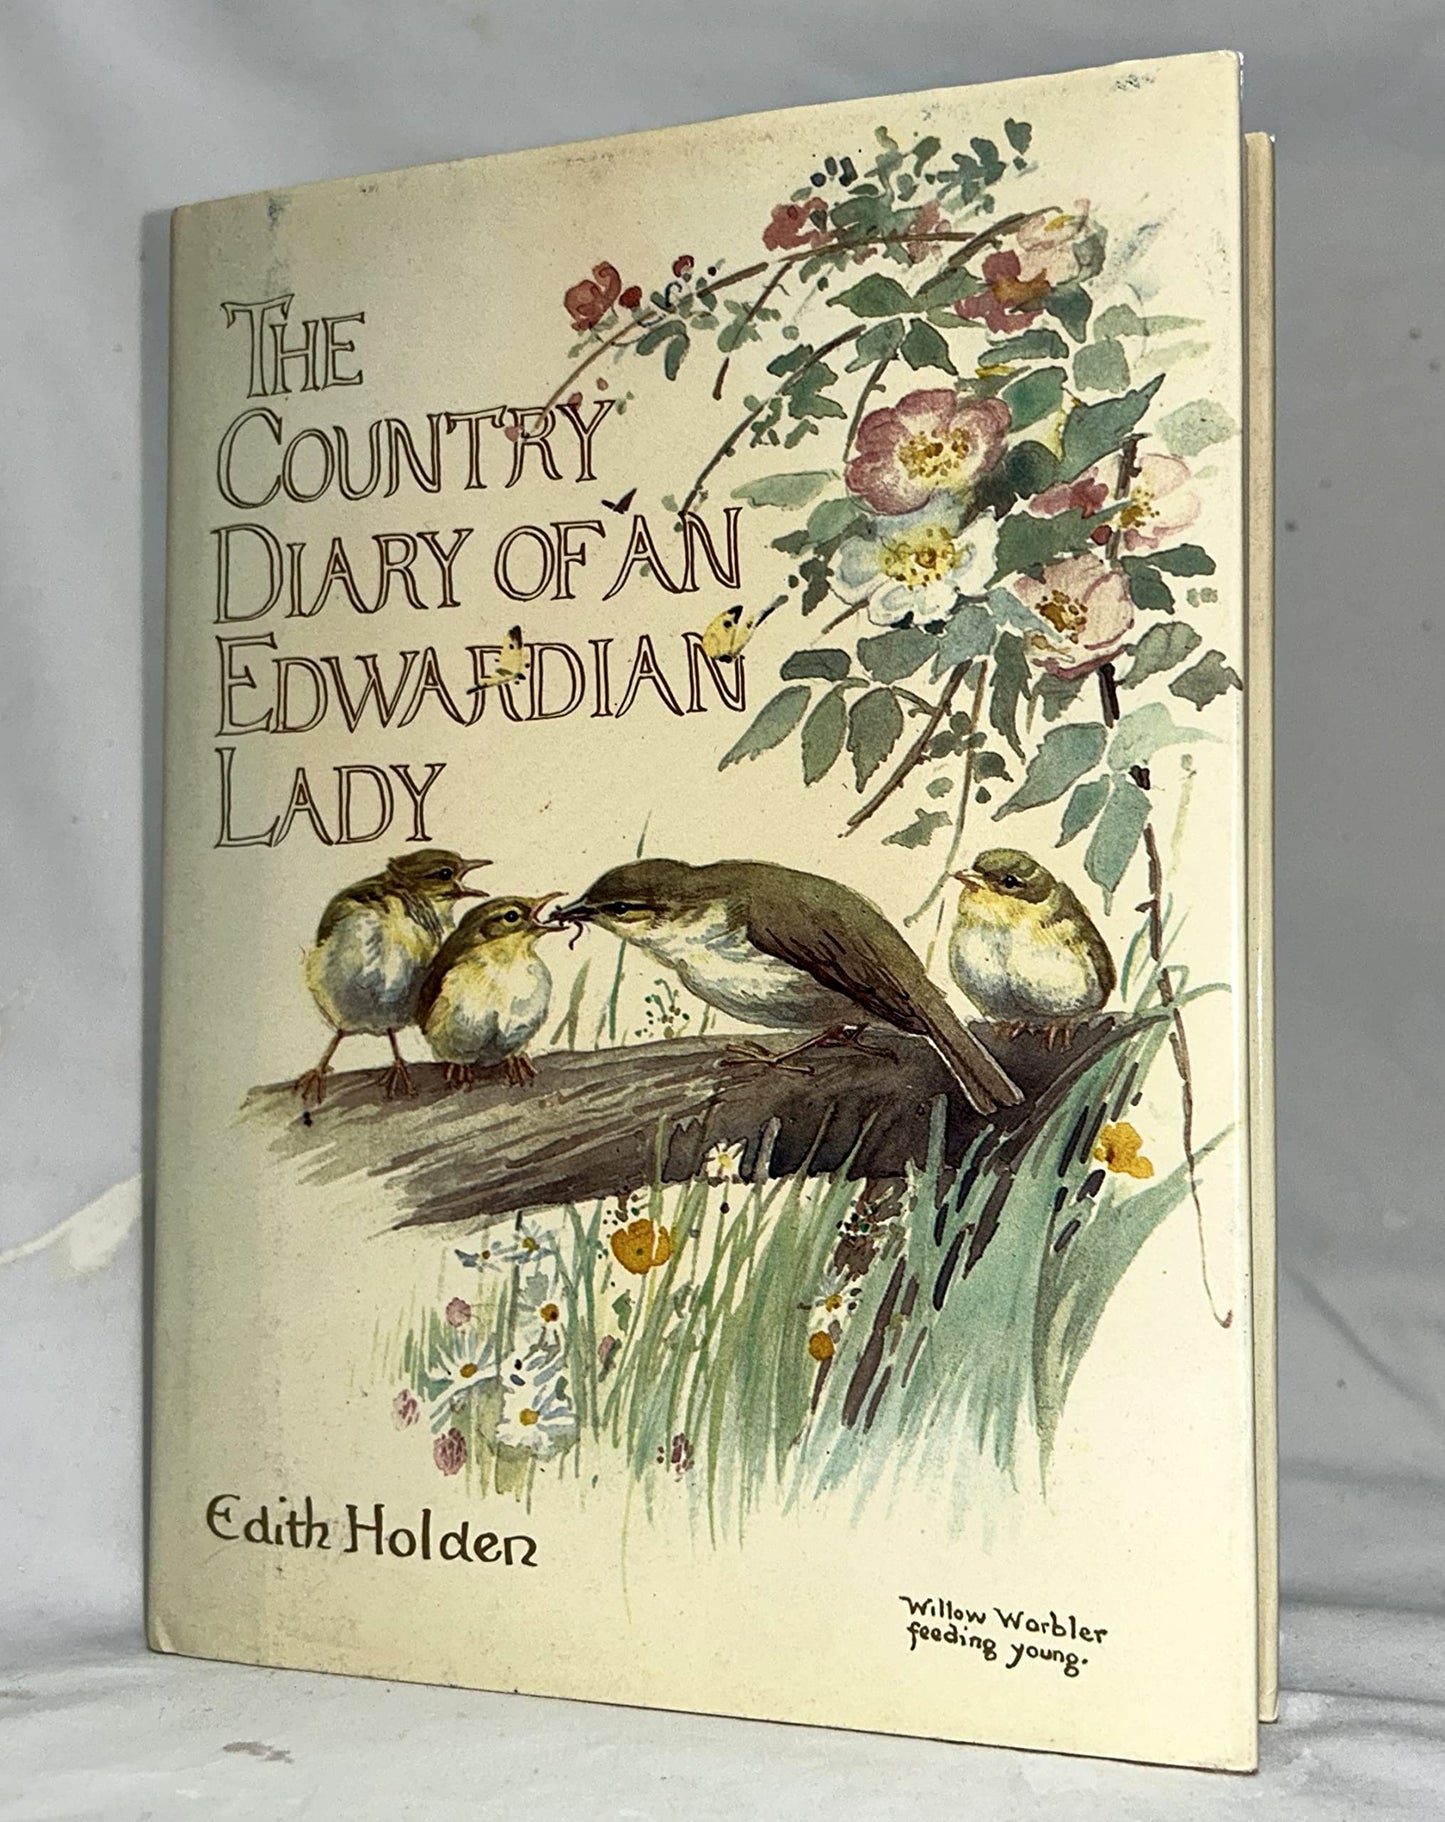 Country Diary of an Edwardian Lady, 1906: A Facsimile Reproduction of a Naturalist's Diary